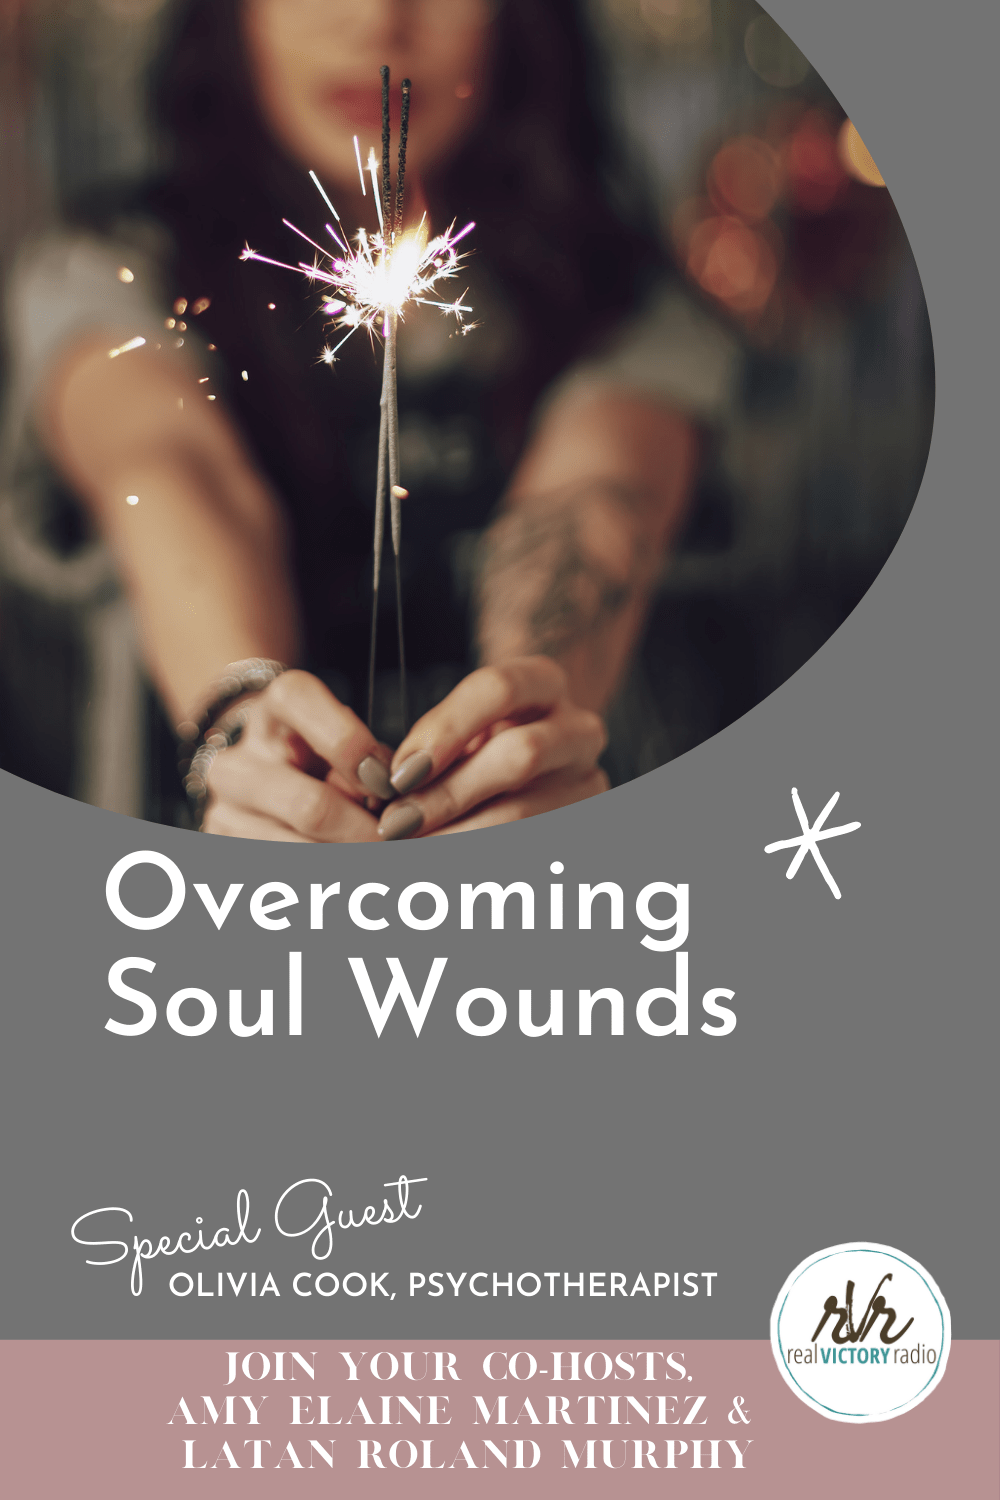 soul wounds and triggers